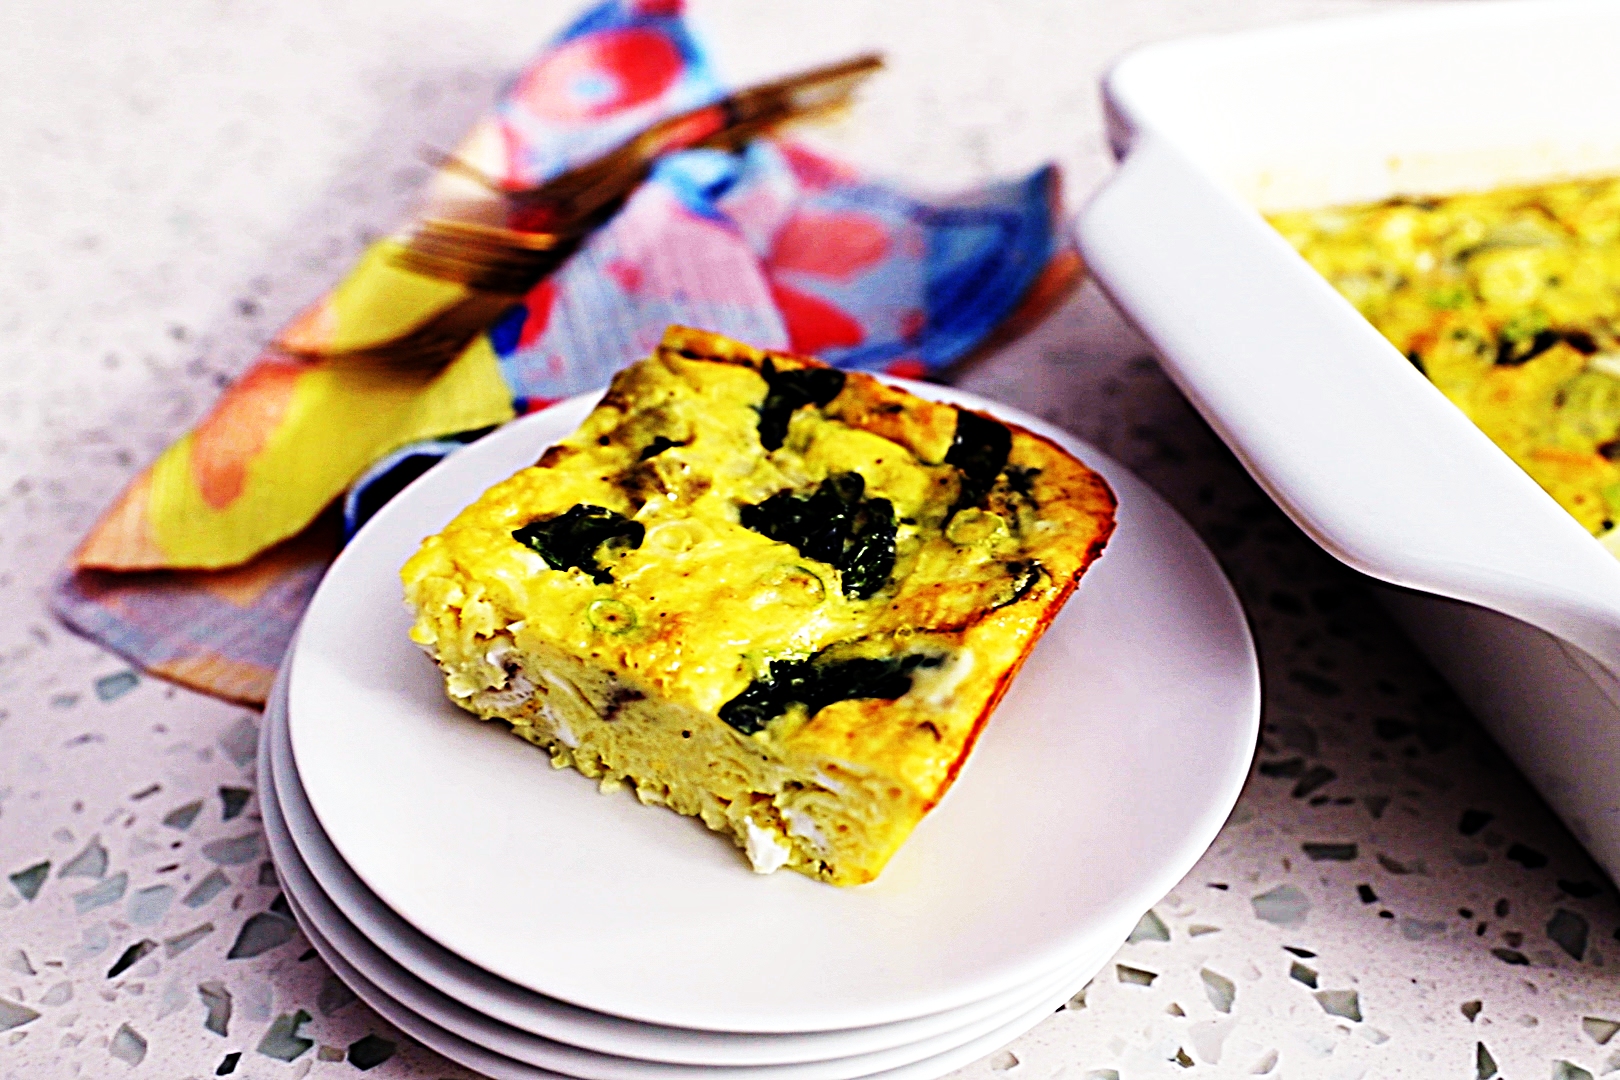 Stupid-Easy Recipe for Spinach and Artichoke Egg Casserole (#1 Top-Rated)